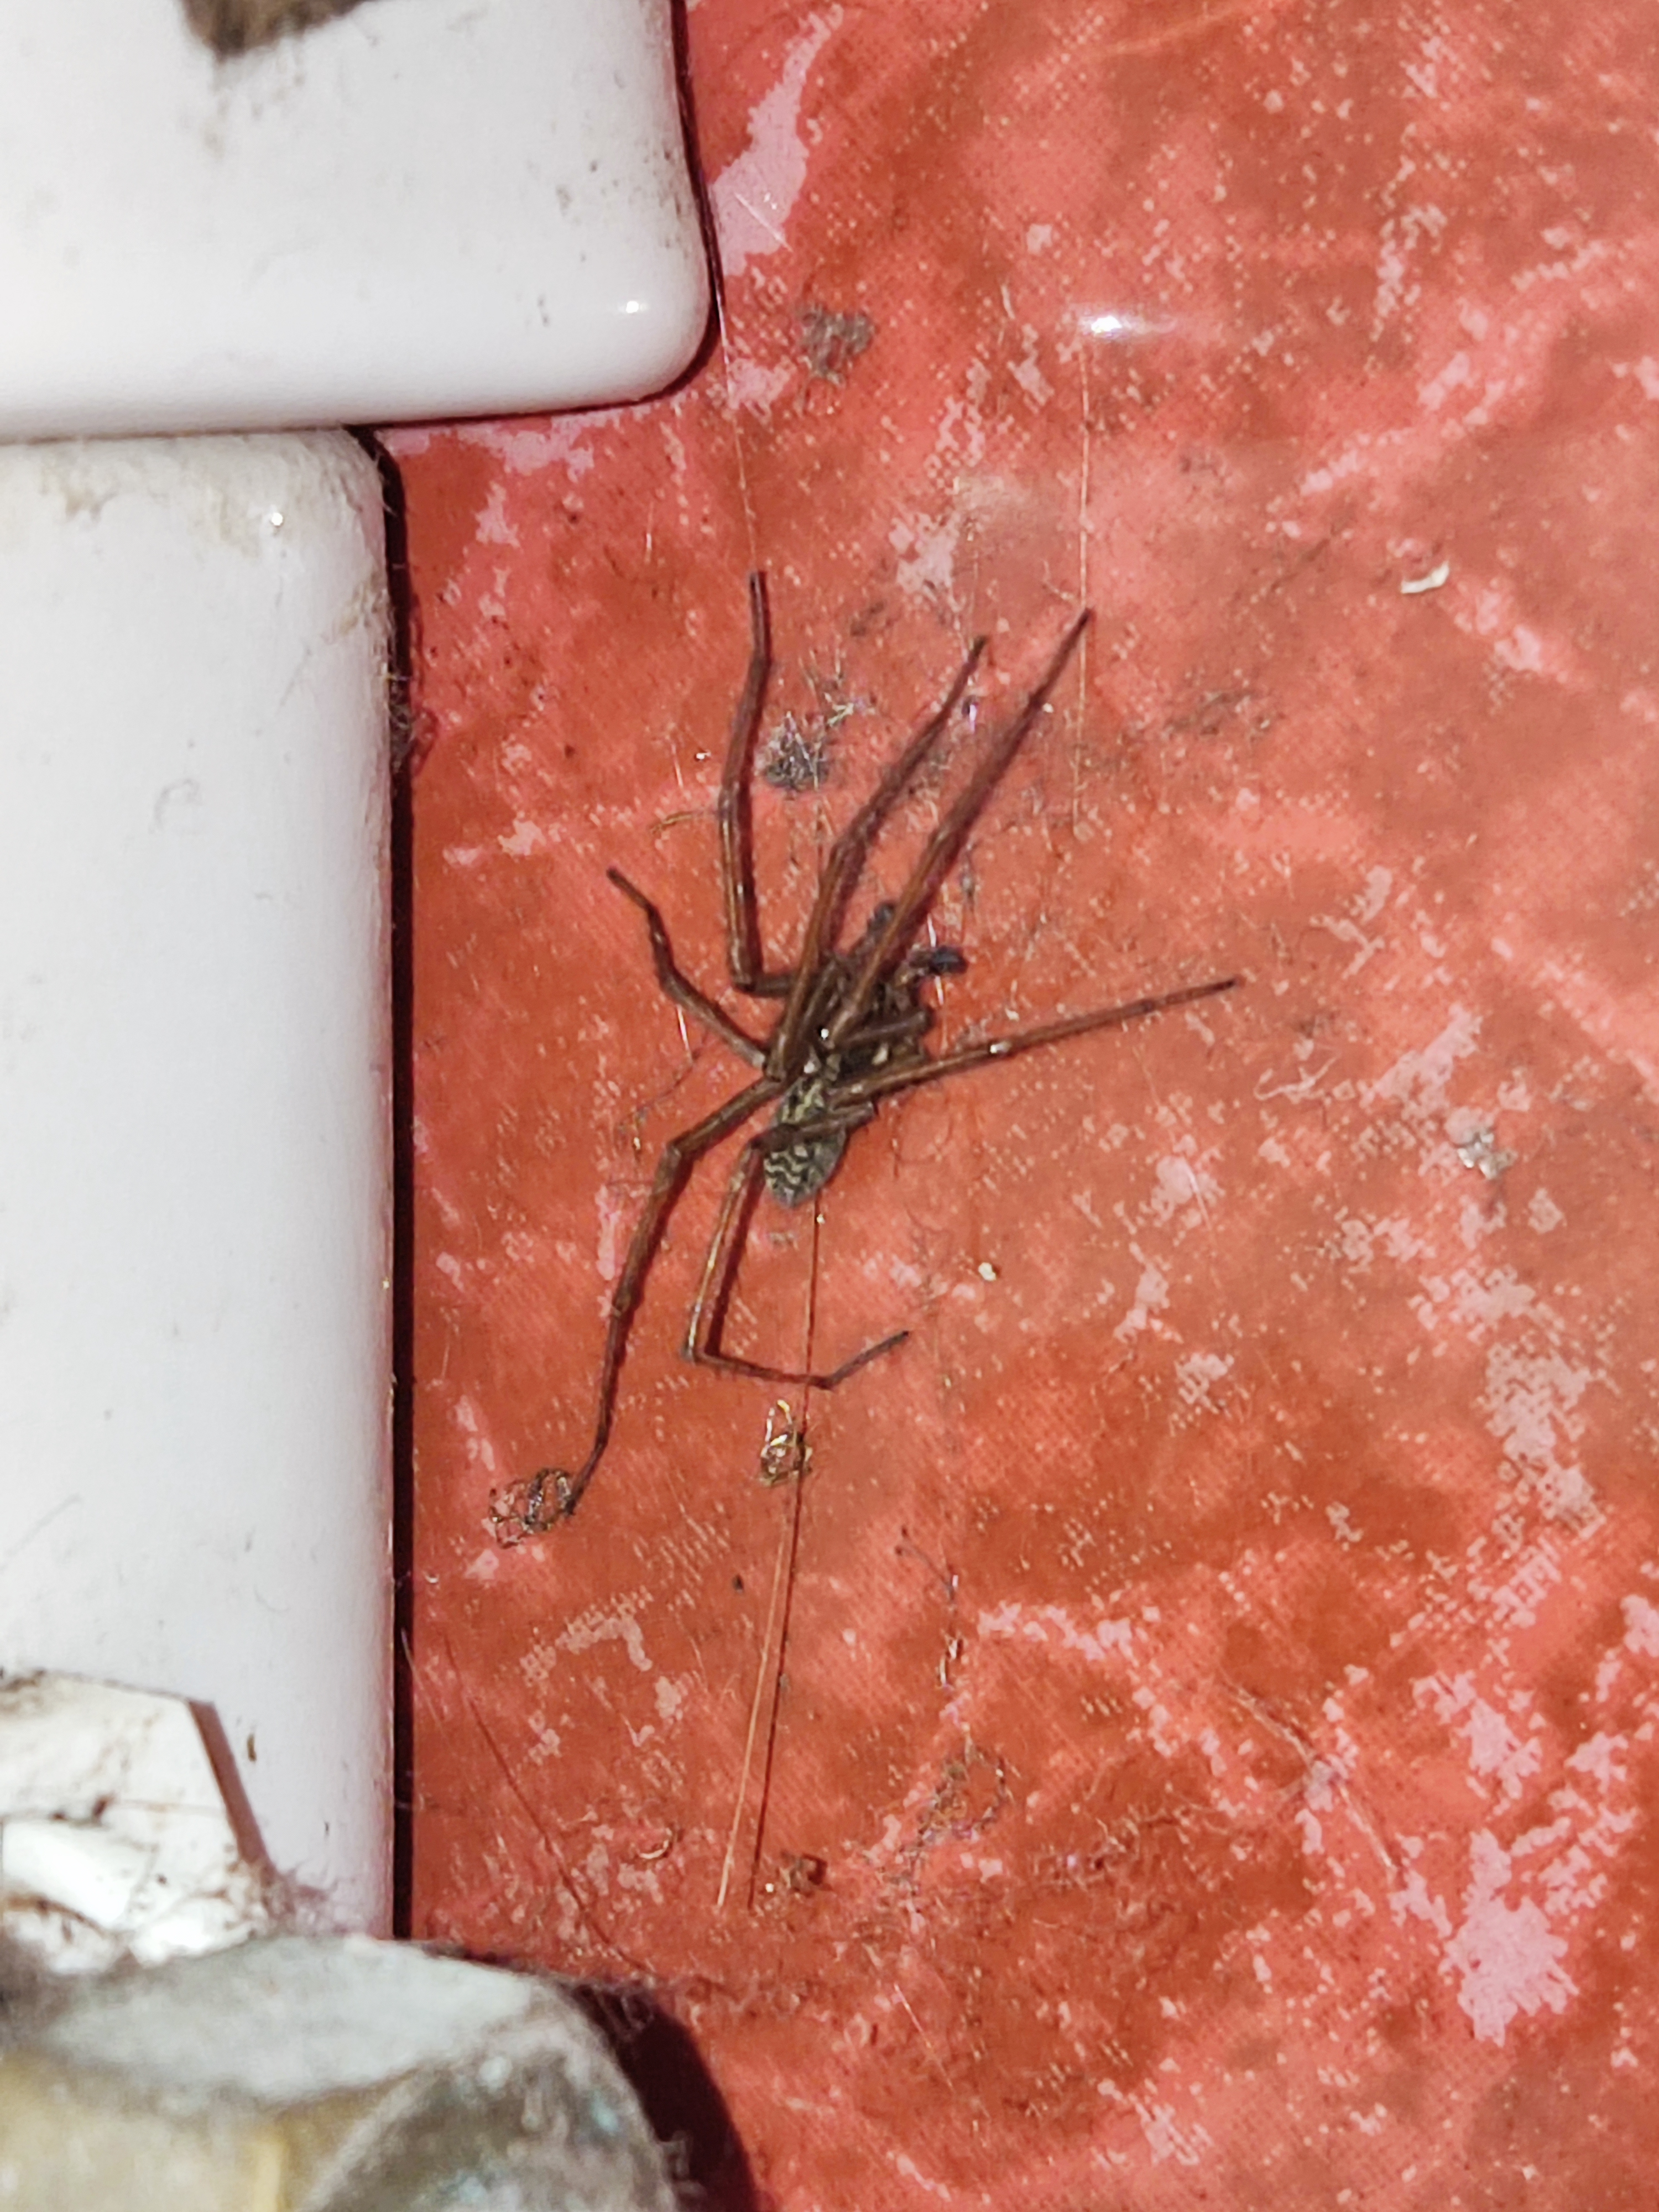 A giant house spider by the cistern of a toilet